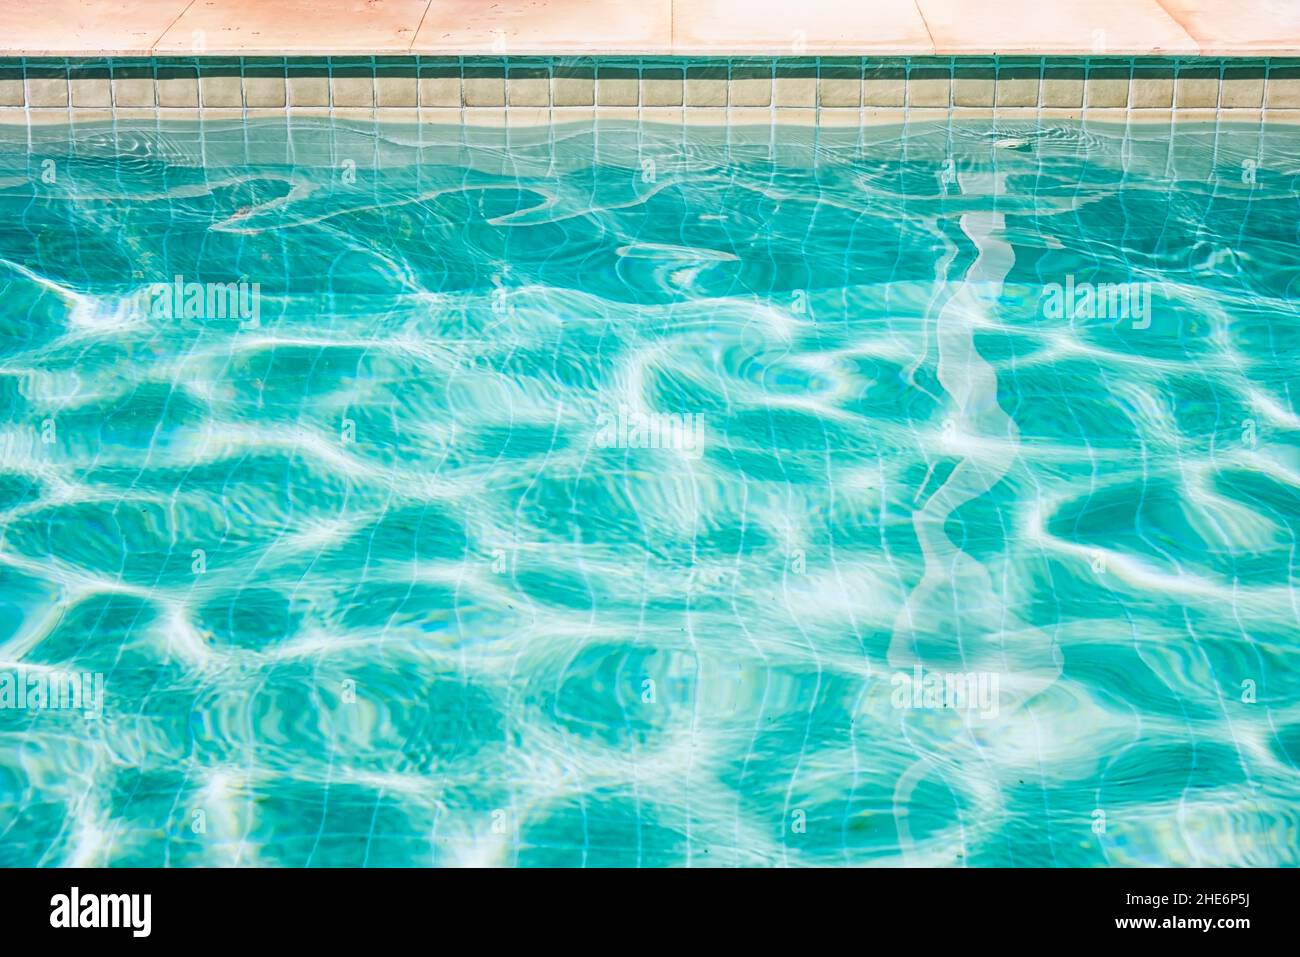 Ripple of water in the swimming pool Stock Photo